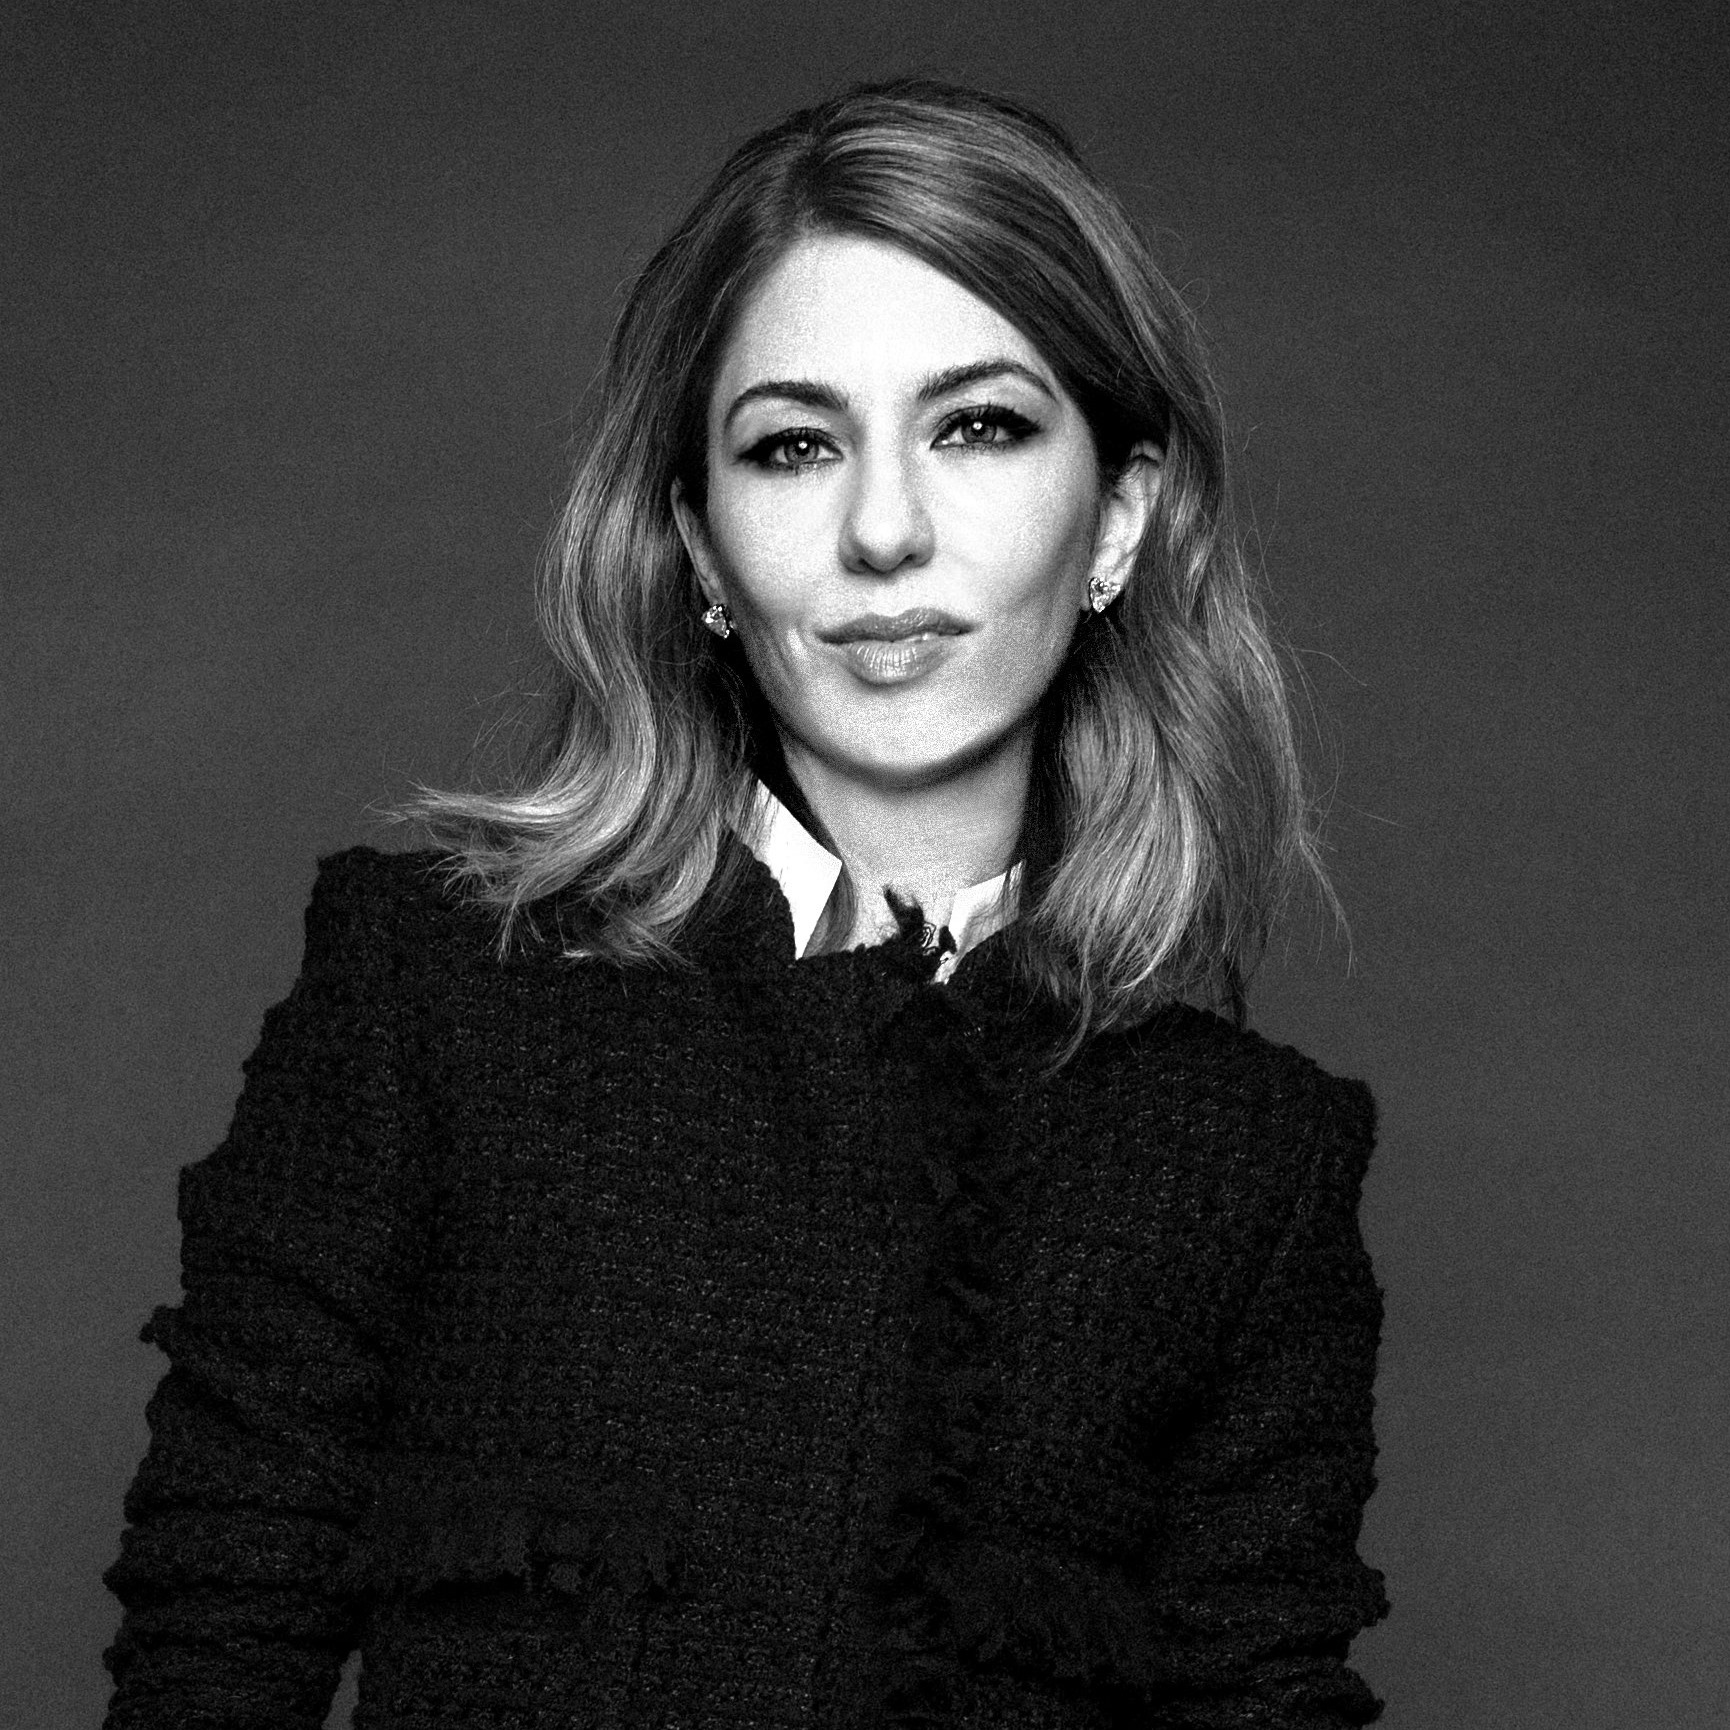 Sophia Coppola takes after her film director father, Francis Ford Coppola through her expansive work in directing.